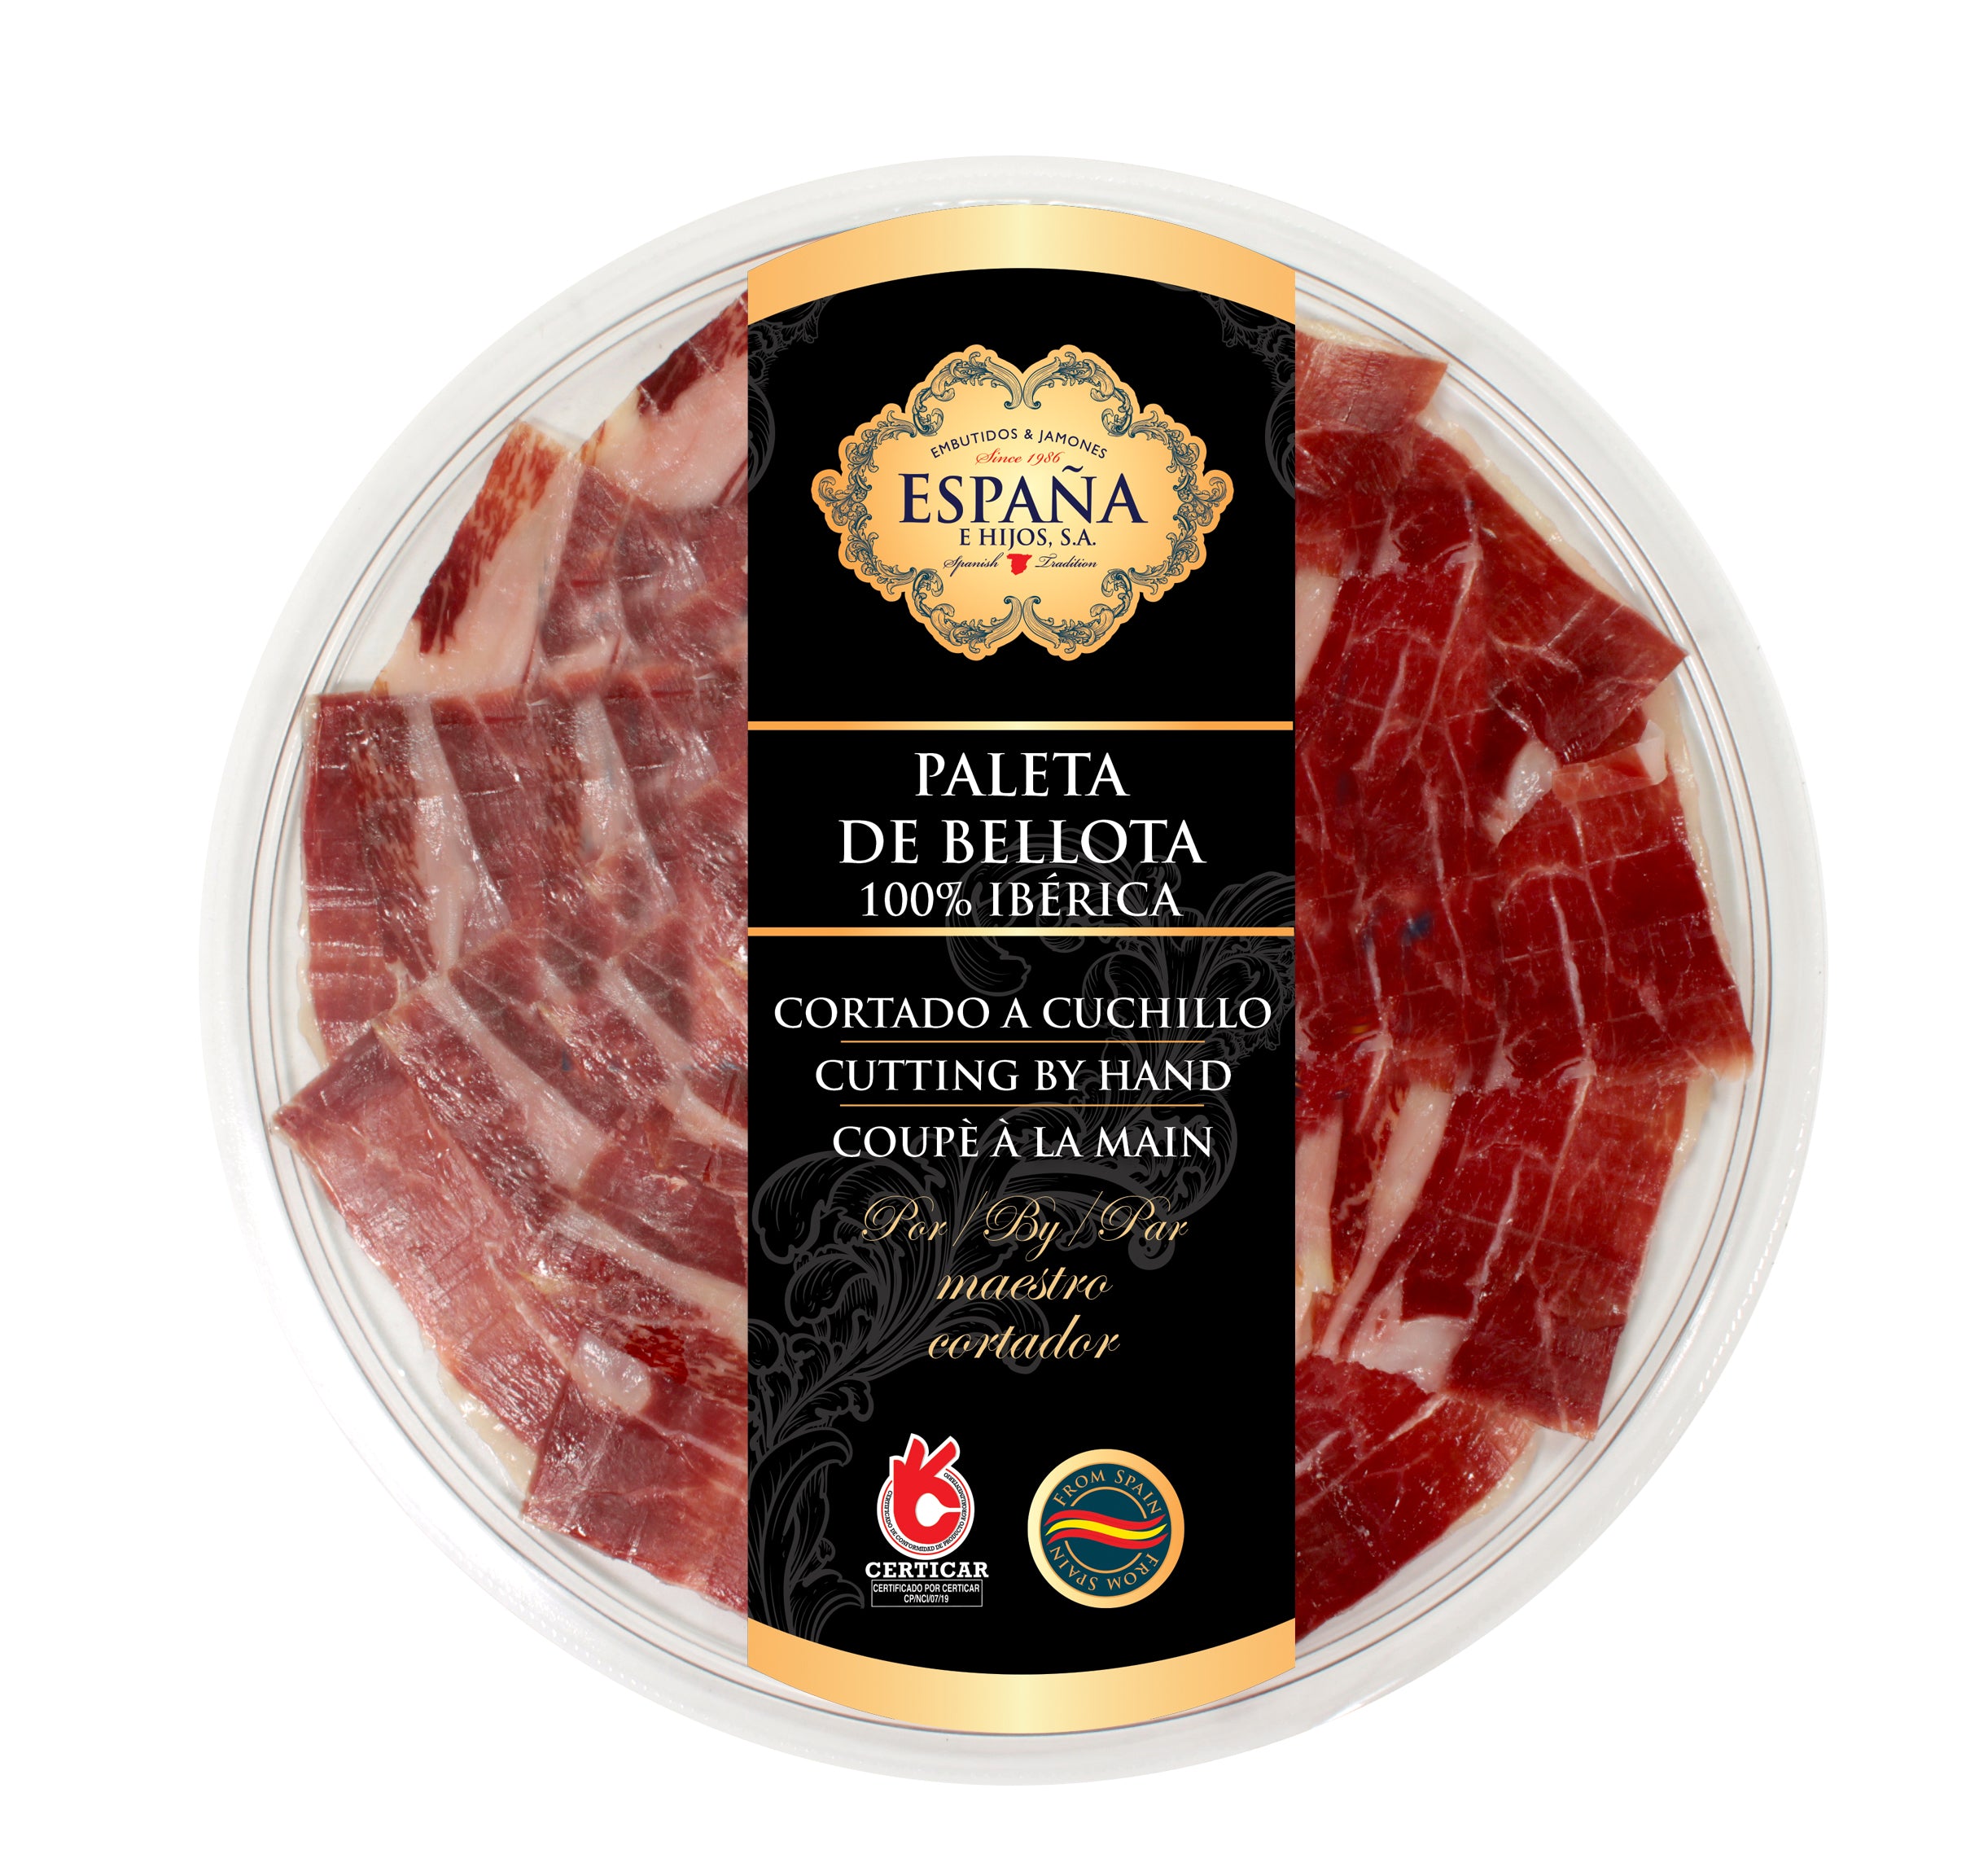 Plate of 100% Iberian Bellota Shoulder Cut with a Knife